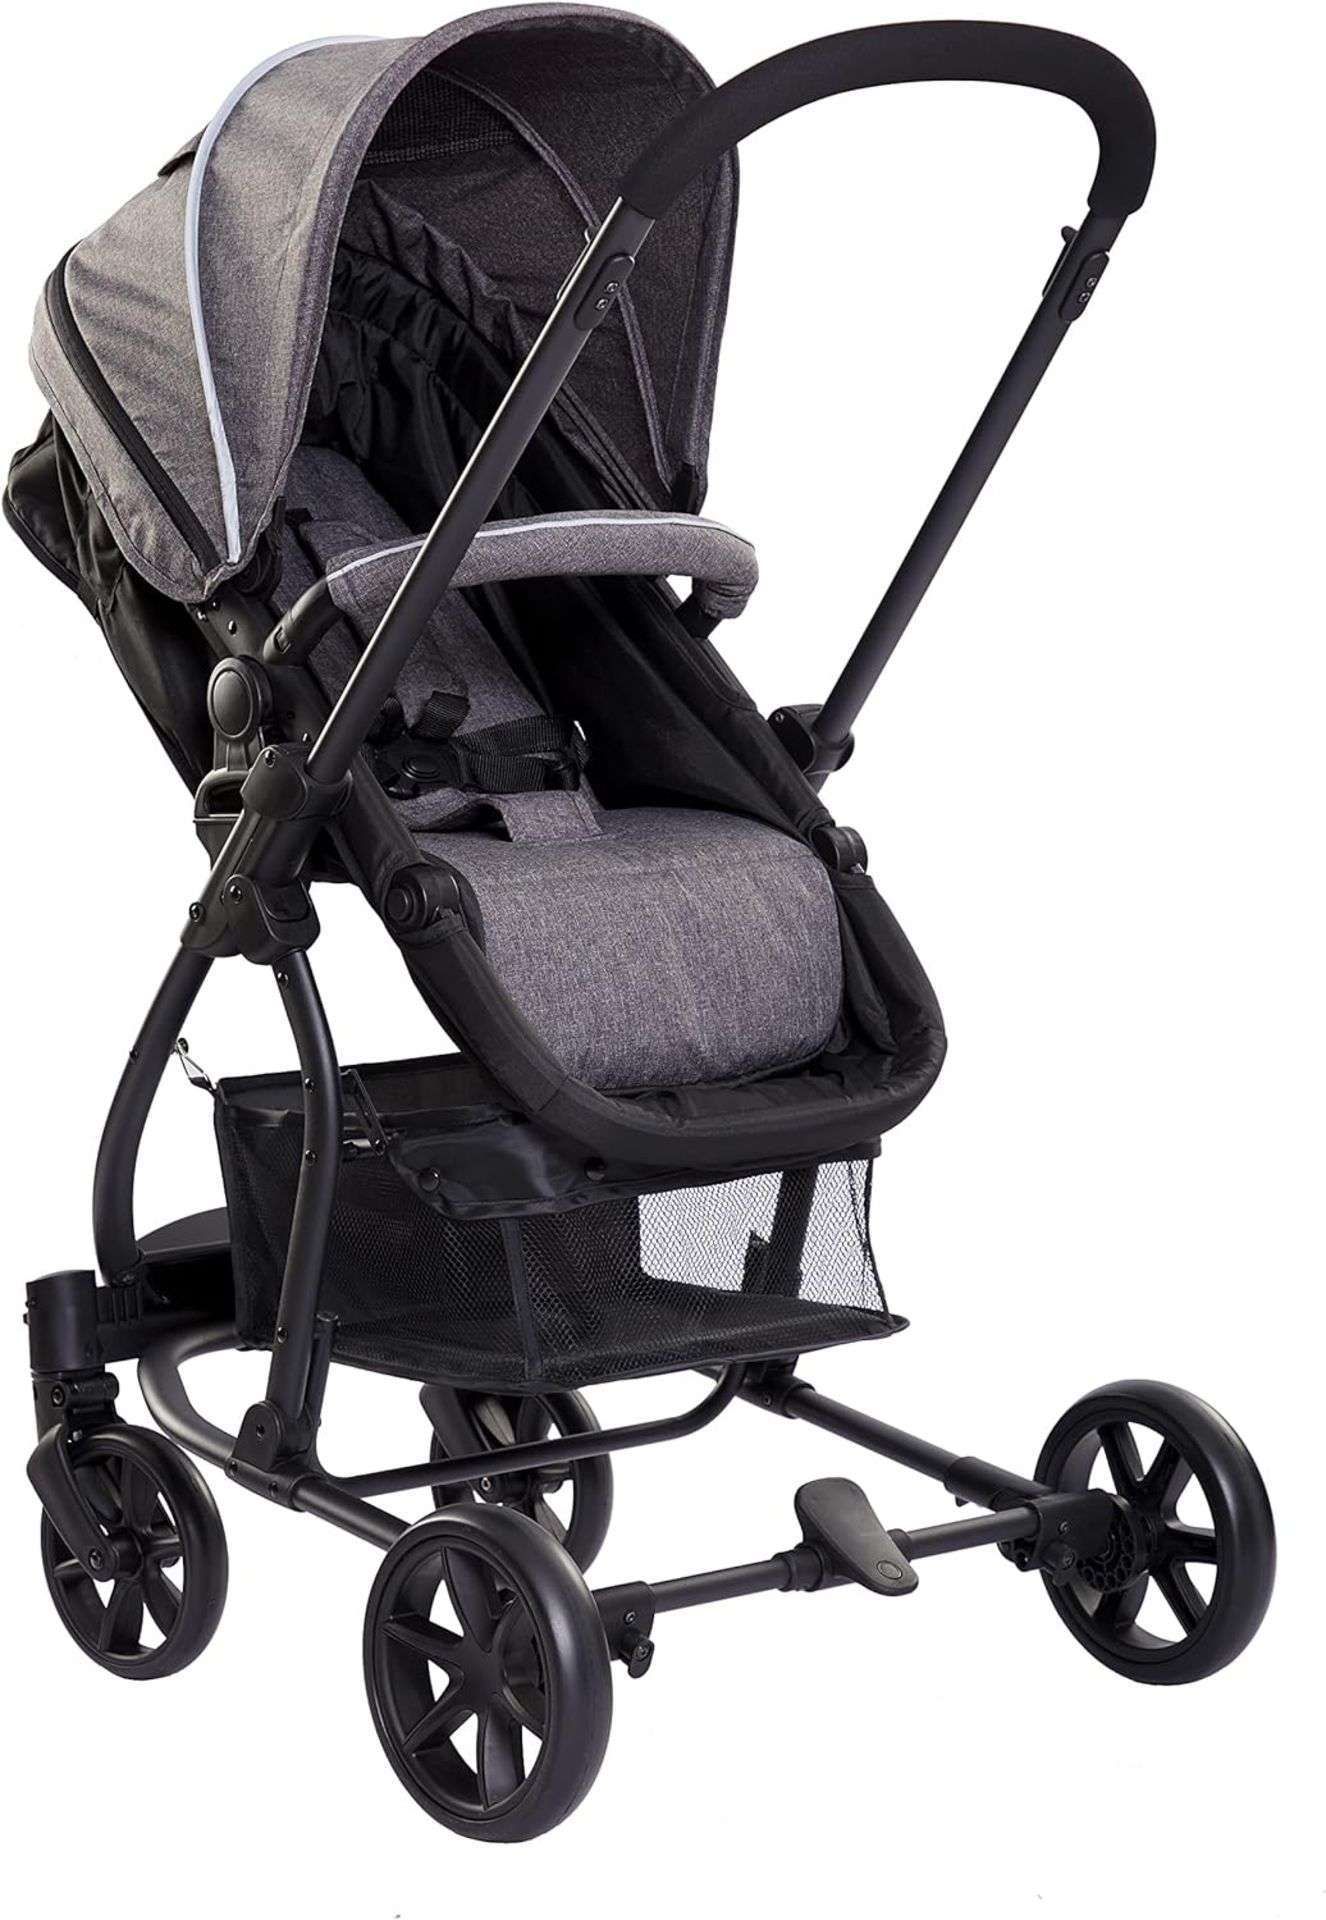 TRADE LOT 5 X BRAND NEW RICCO BABY 2 IN 1 FOLDABLE BUGGY STROLLER PUSHCHAIR GREY R18-7 - Image 3 of 4